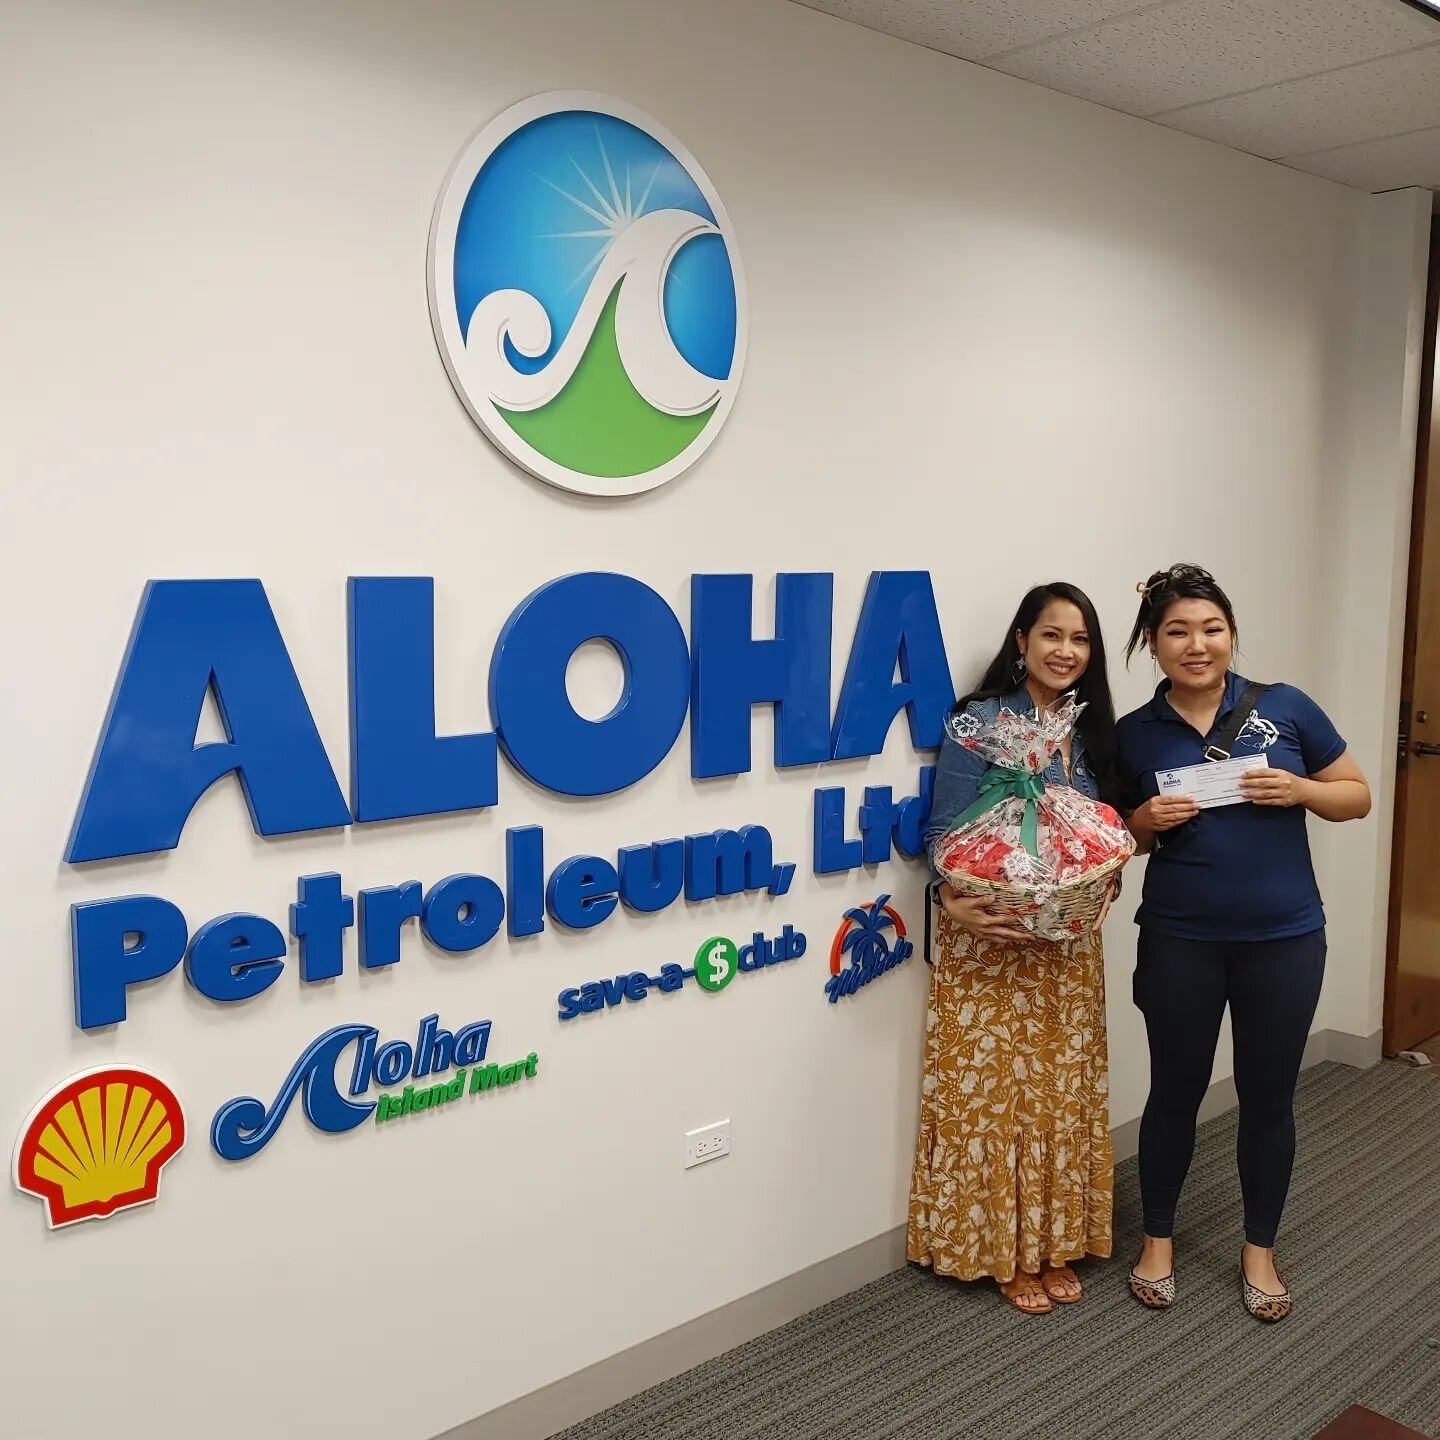 We want to send a big thank you to Aloha Petroleum @alohagasltd for being one of our Tsuke Shime(silver) sponsor for our Megabon Event. 

It means so much to us and we are really excited to partner with @todaijihawaii to bring this event to Oahu. 

I